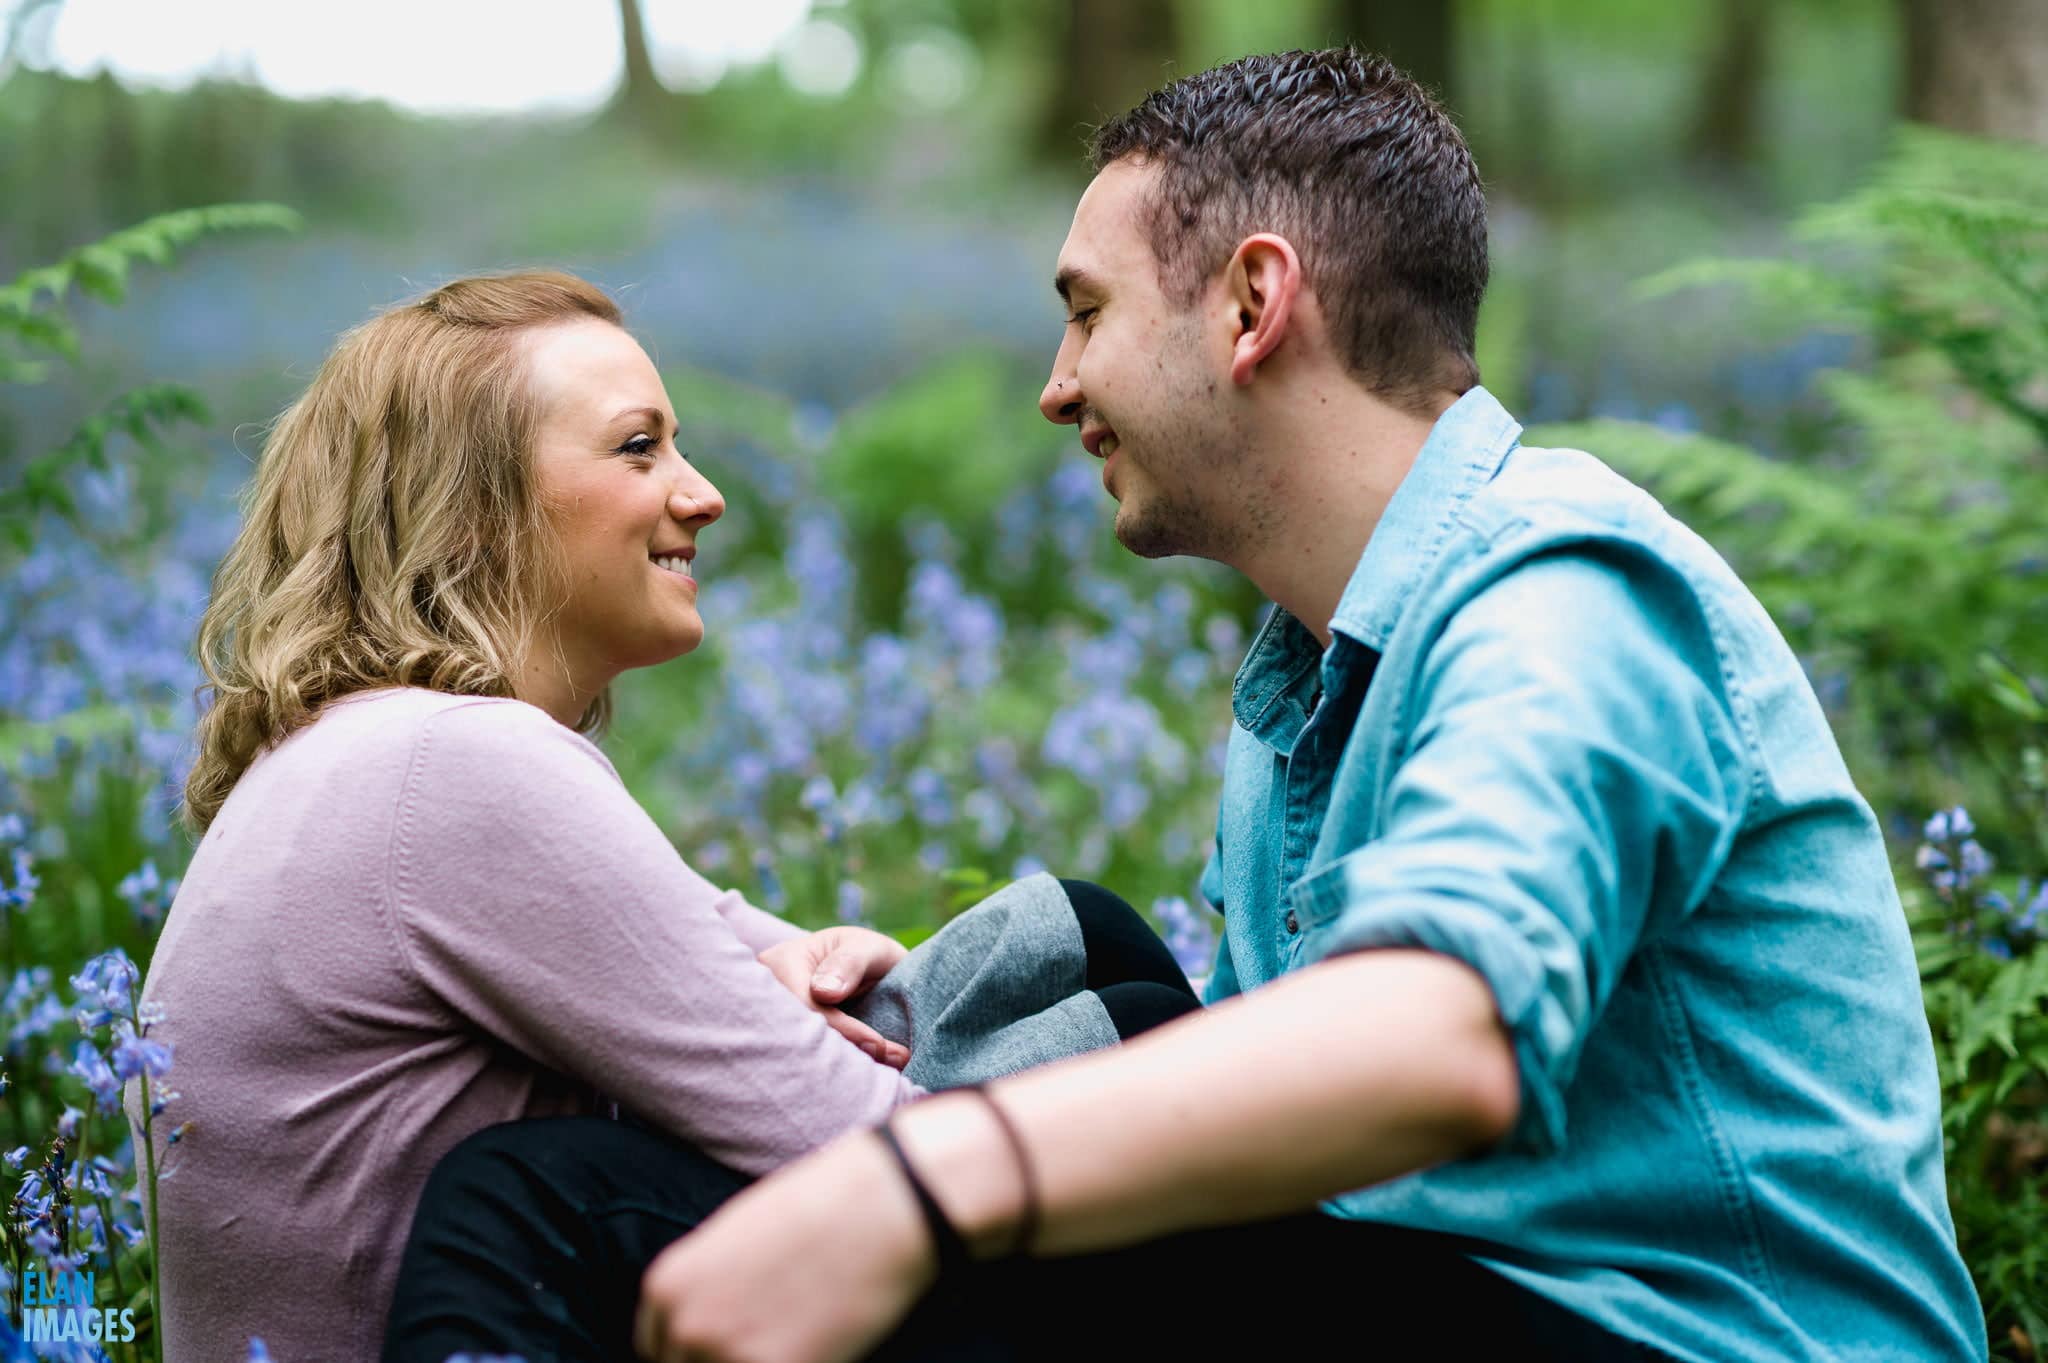 Engagement Photo Shoot in the Bluebell Woods near Bristol 18